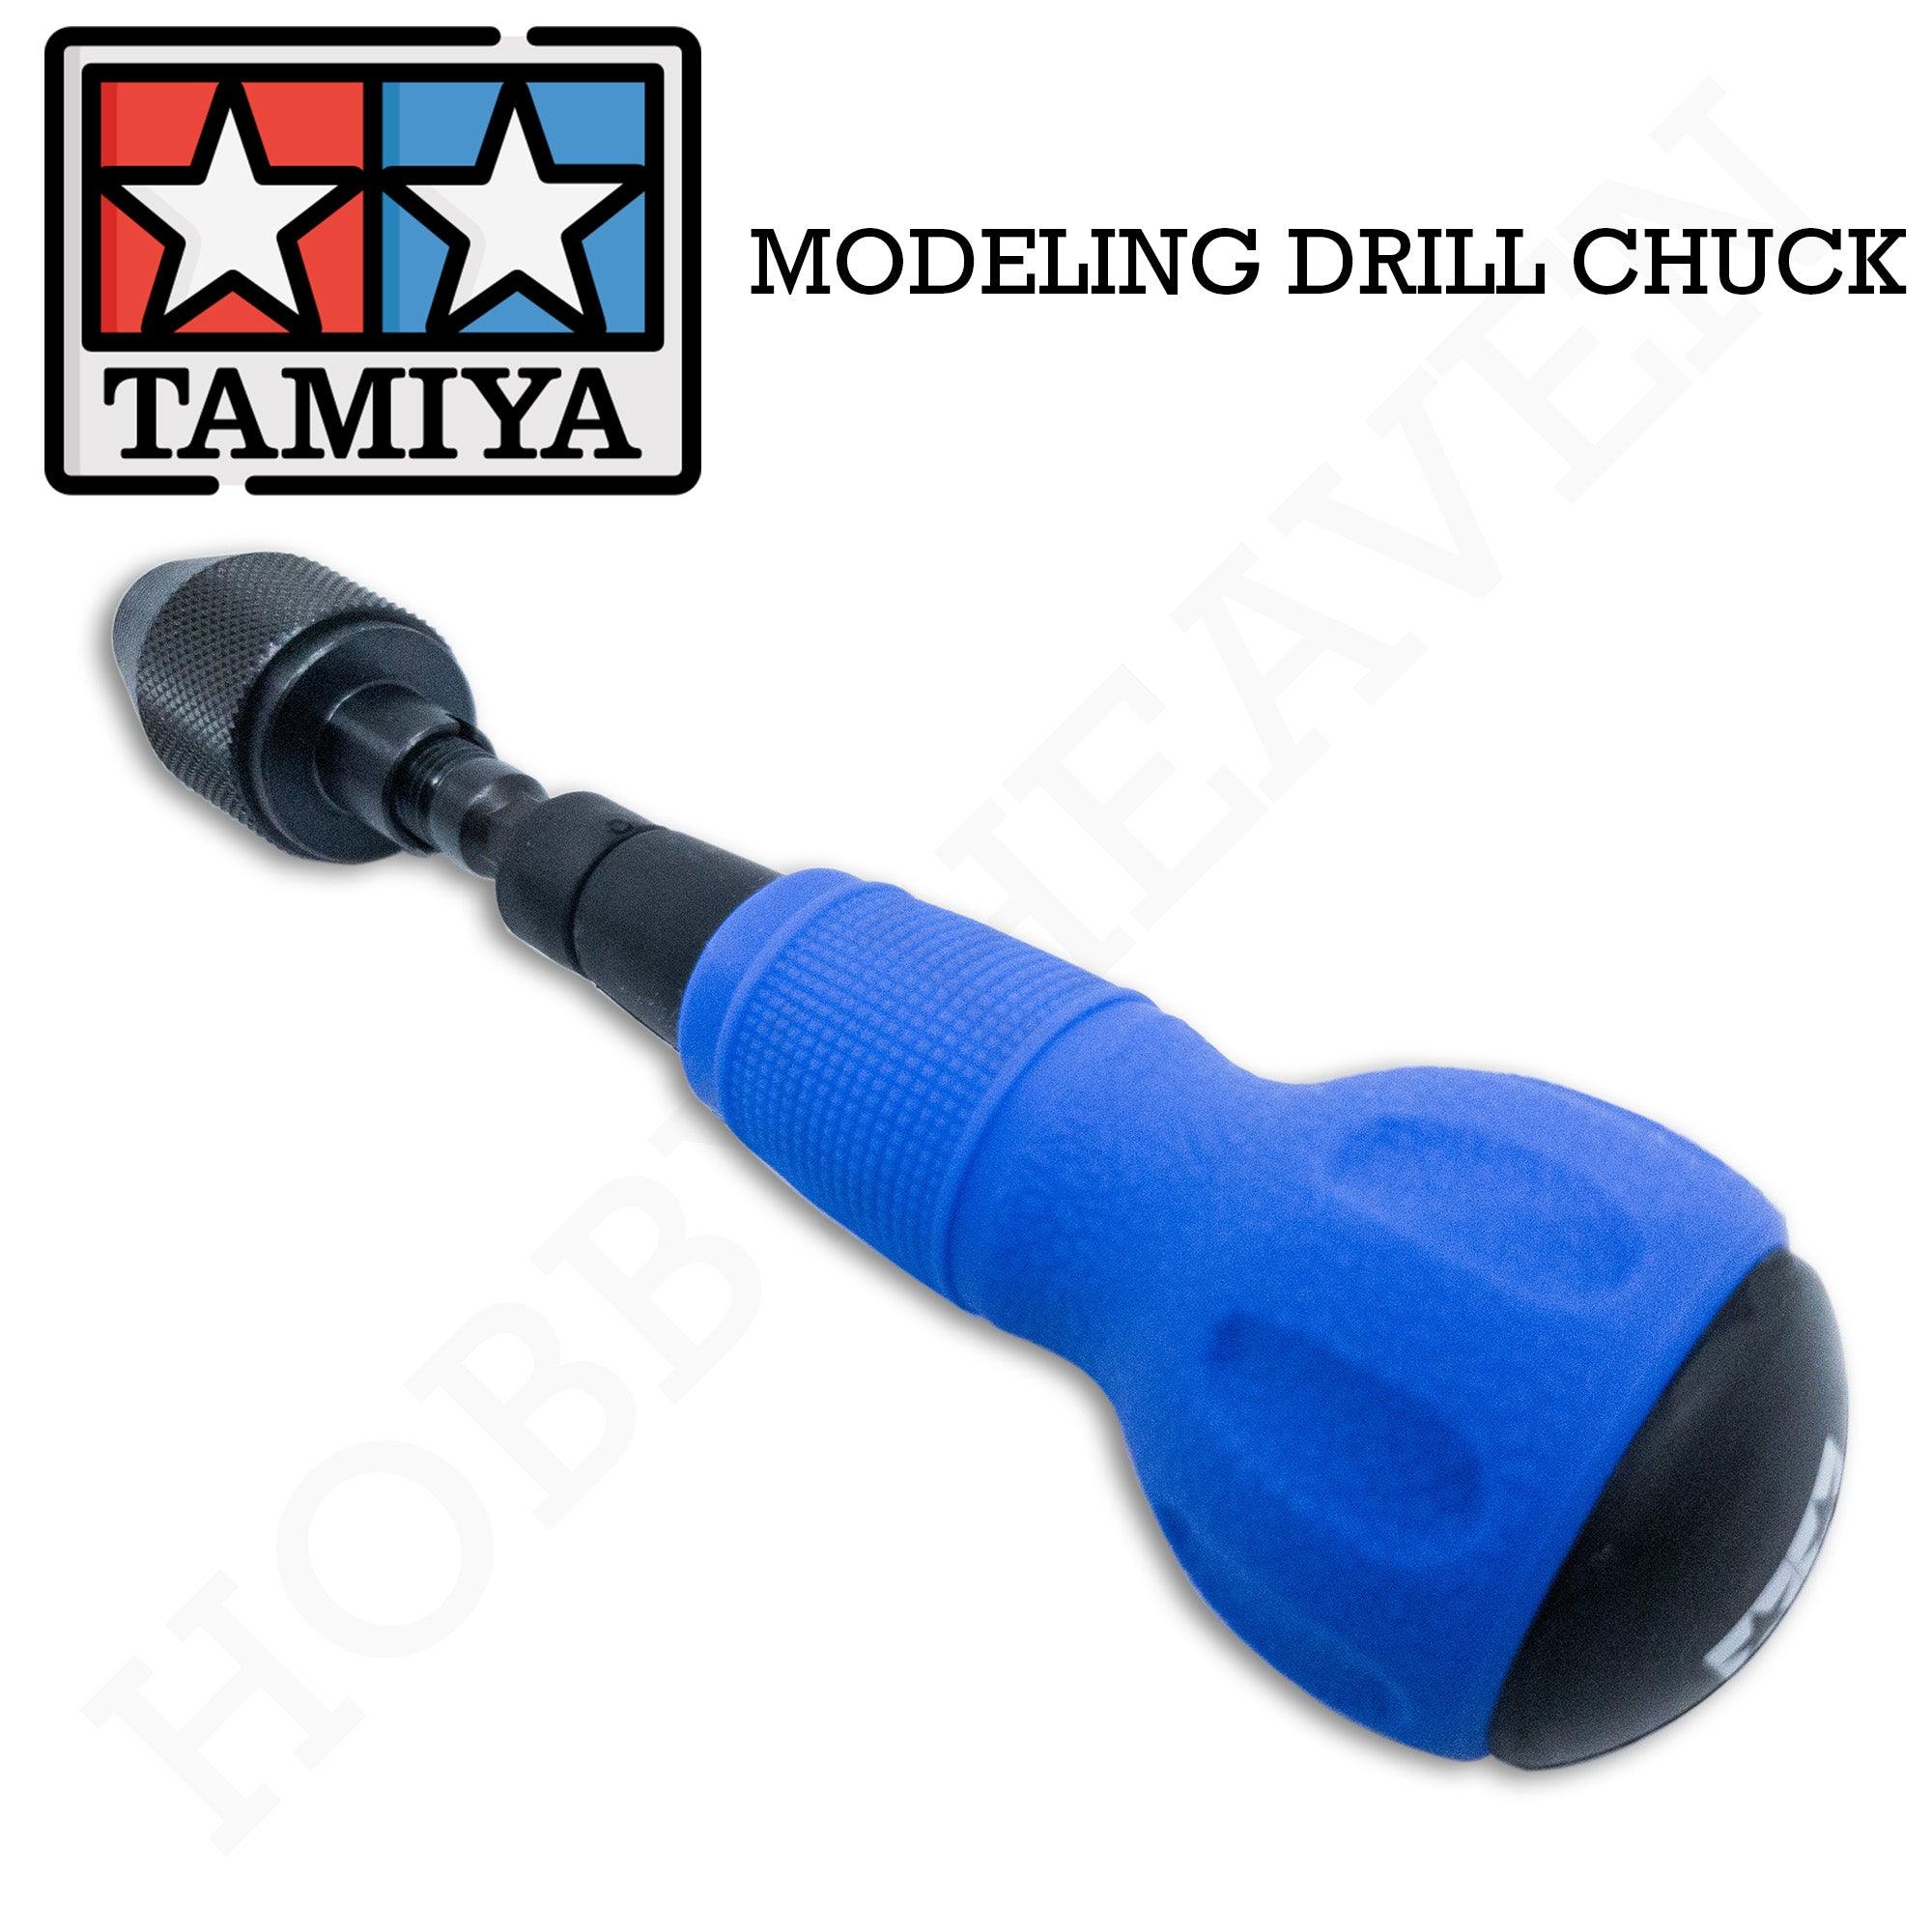 Tamiya Electric Handy Drill Build and Review • Canada's largest selection  of model paints, kits, hobby tools, airbrushing, and crafts with online  shipping and up to date inventory.